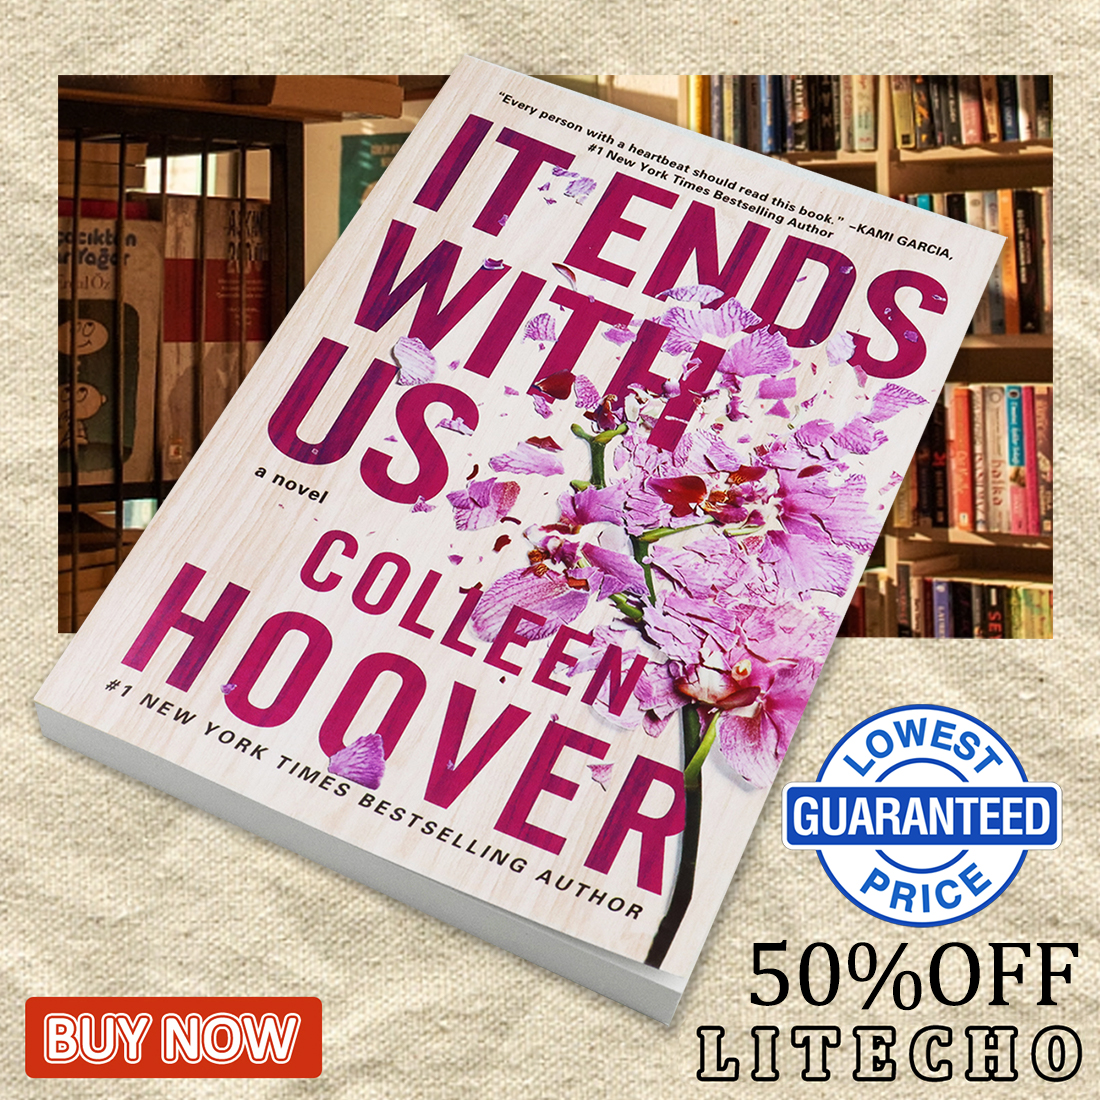 By Colleen Hoover, It Ends With Us and Ugly Love - Two books combo